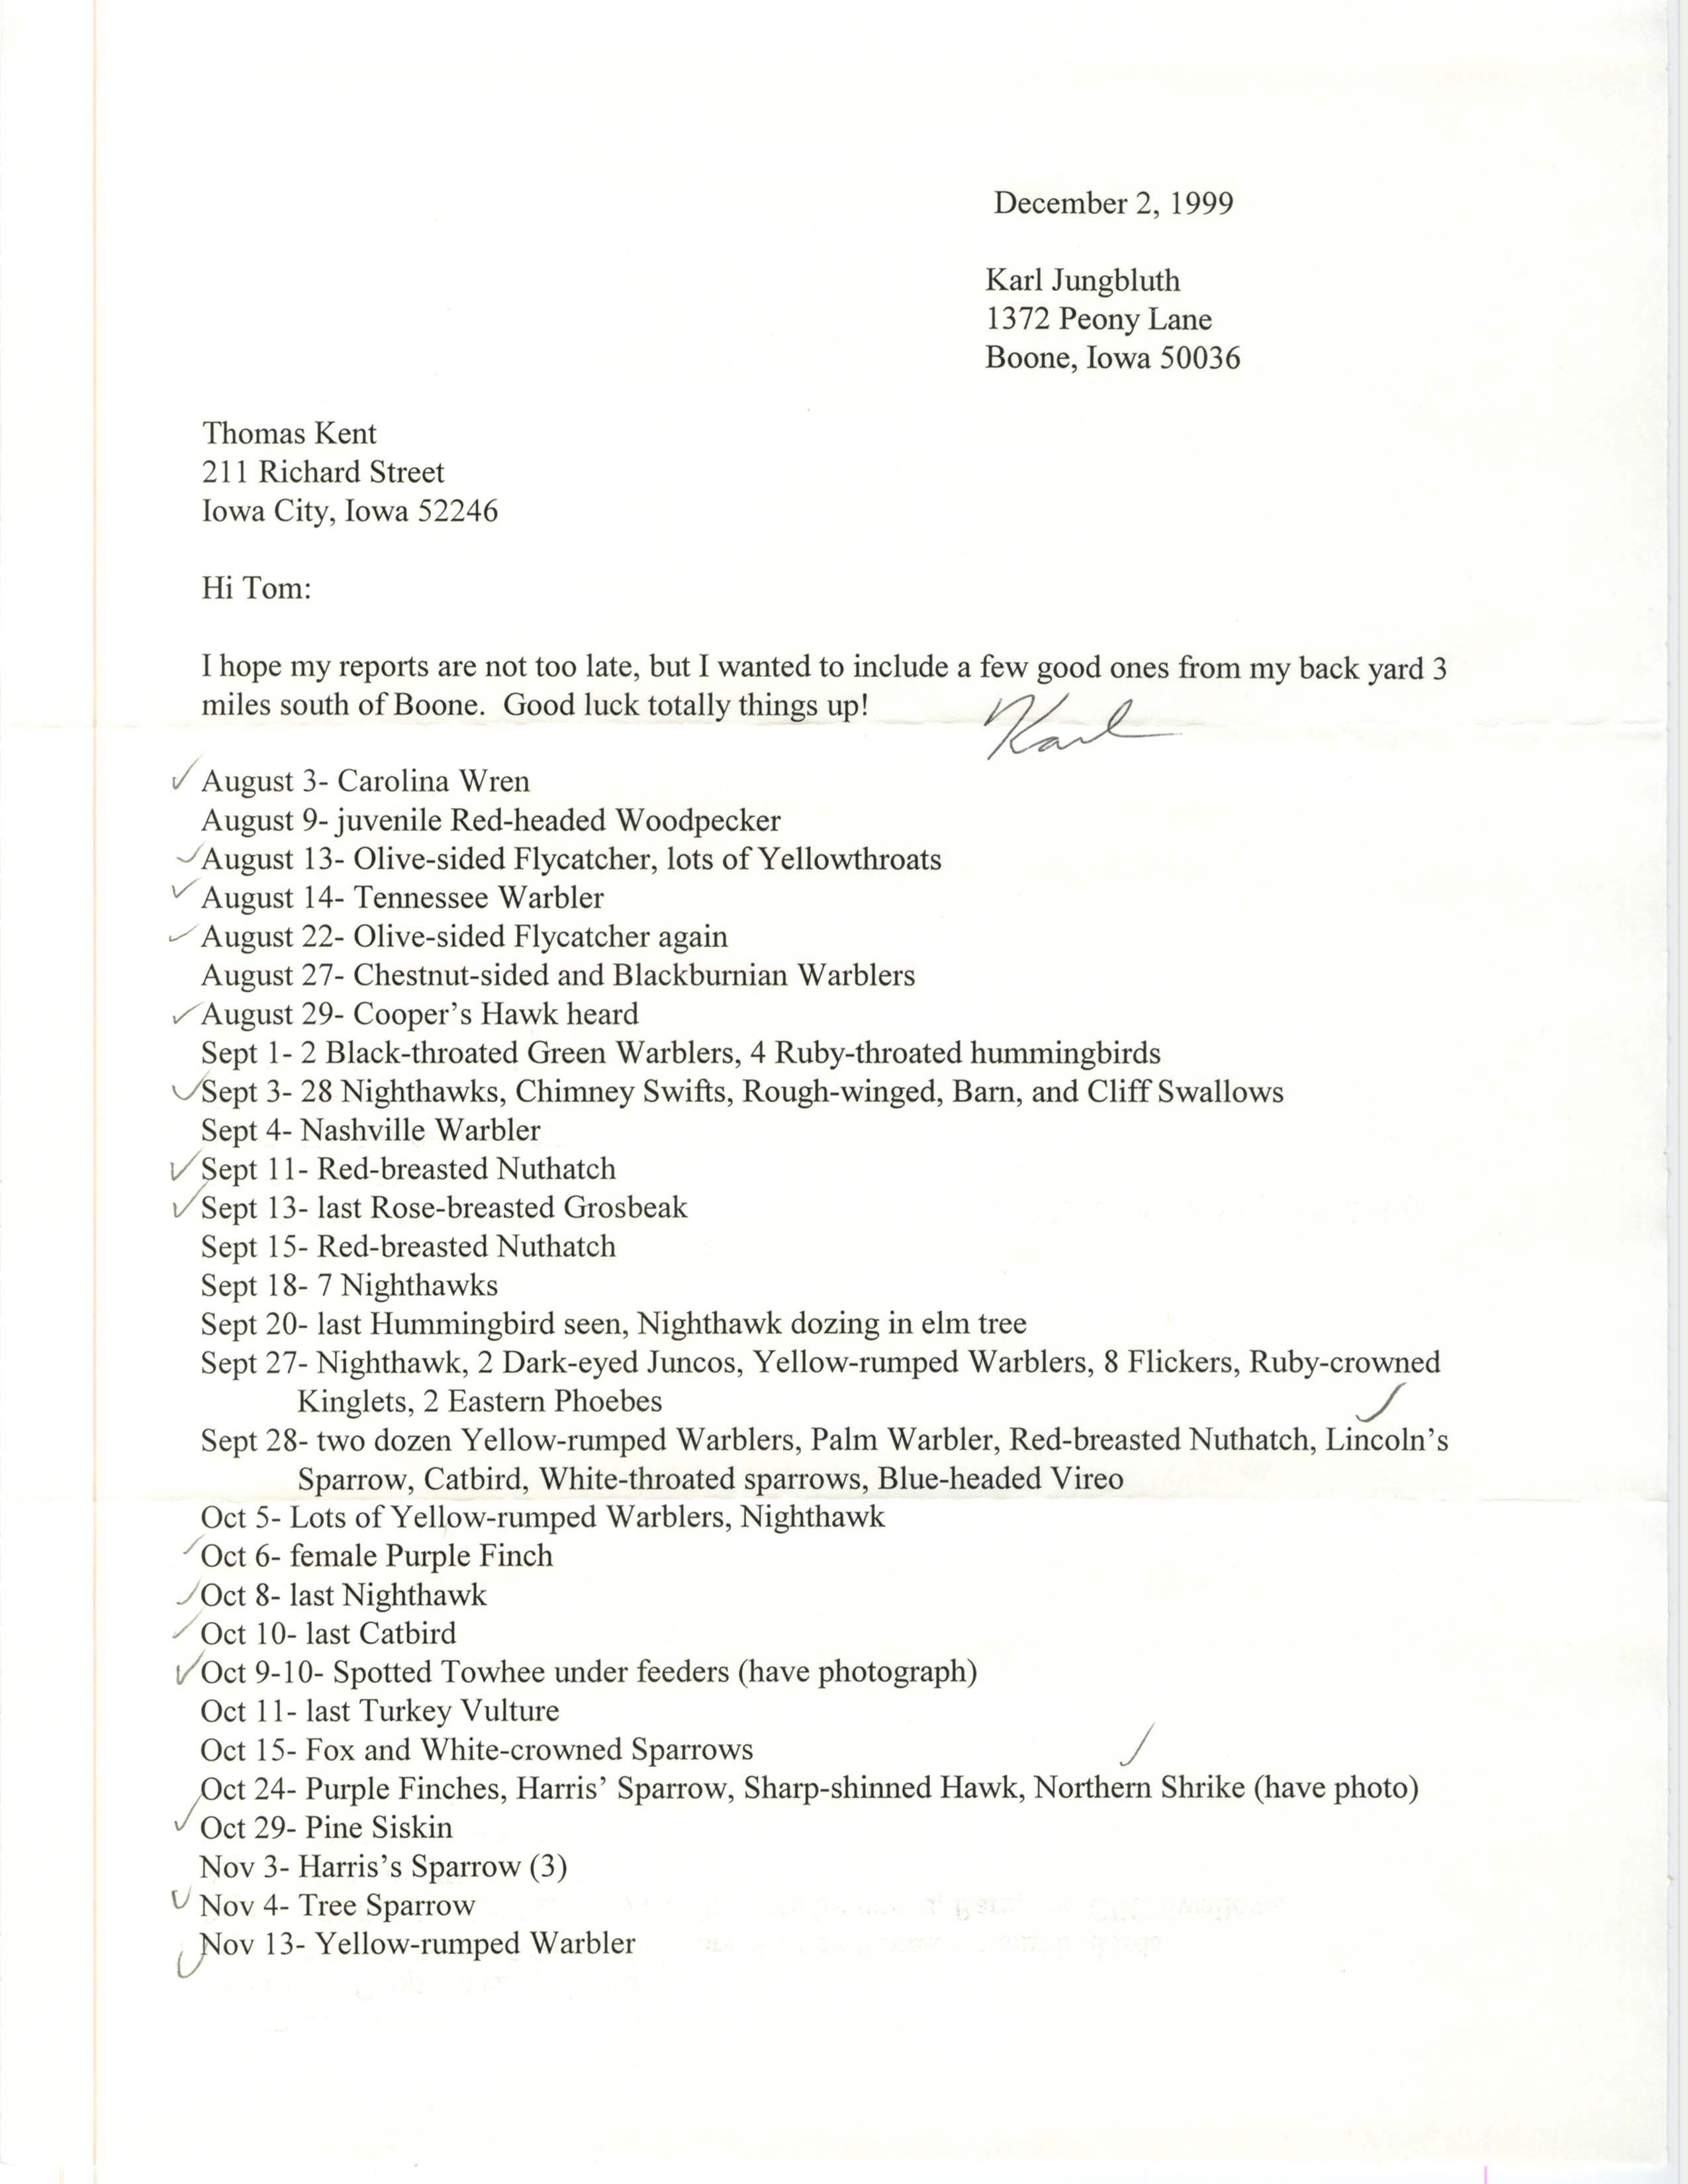 Karl Jungbluth letter to Thomas Kent regarding fall reports, December 2, 1999